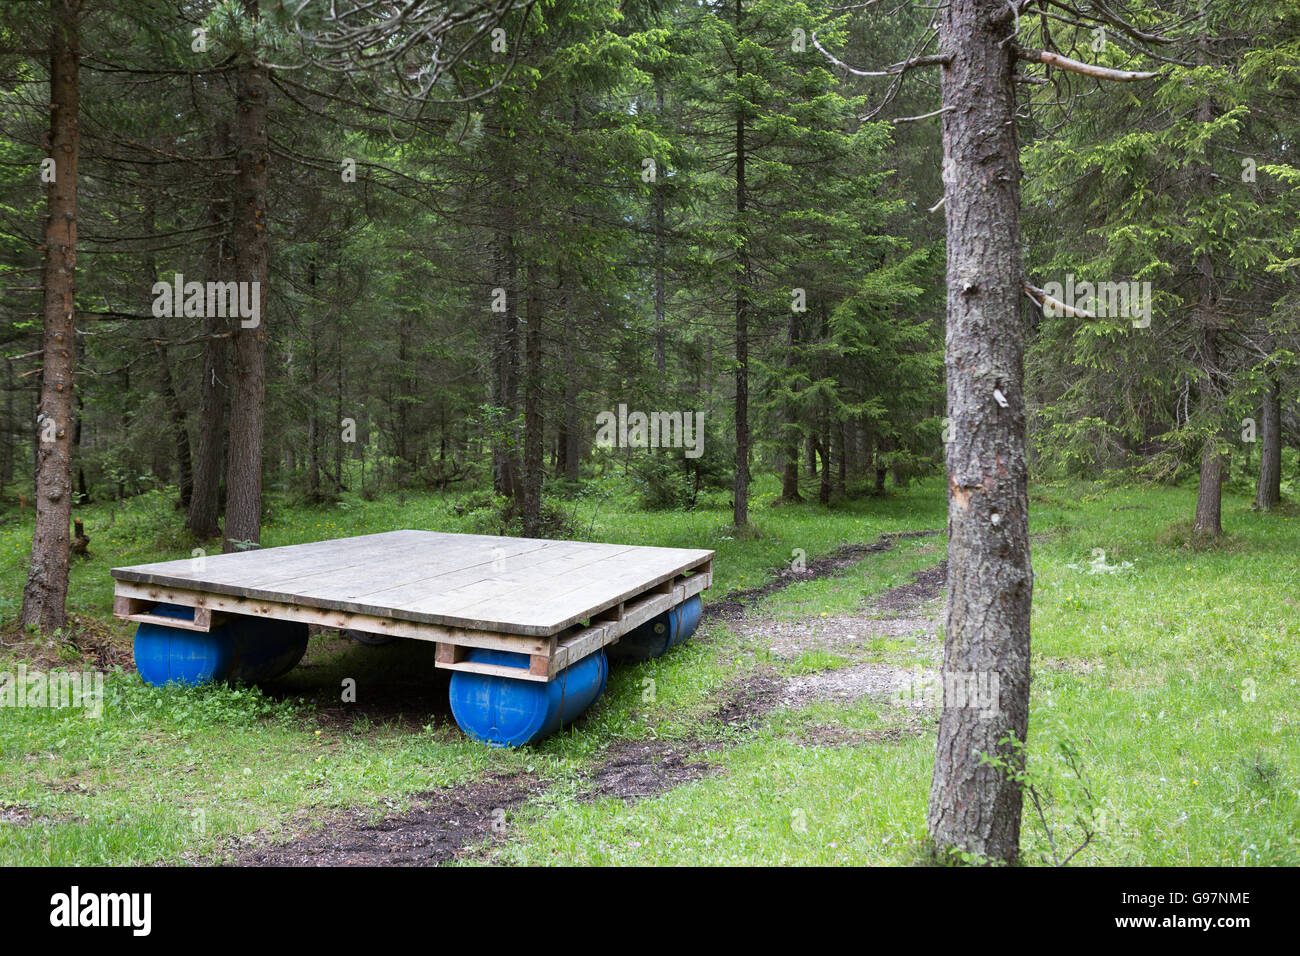 A raft abandoned in a forest Stock Photo